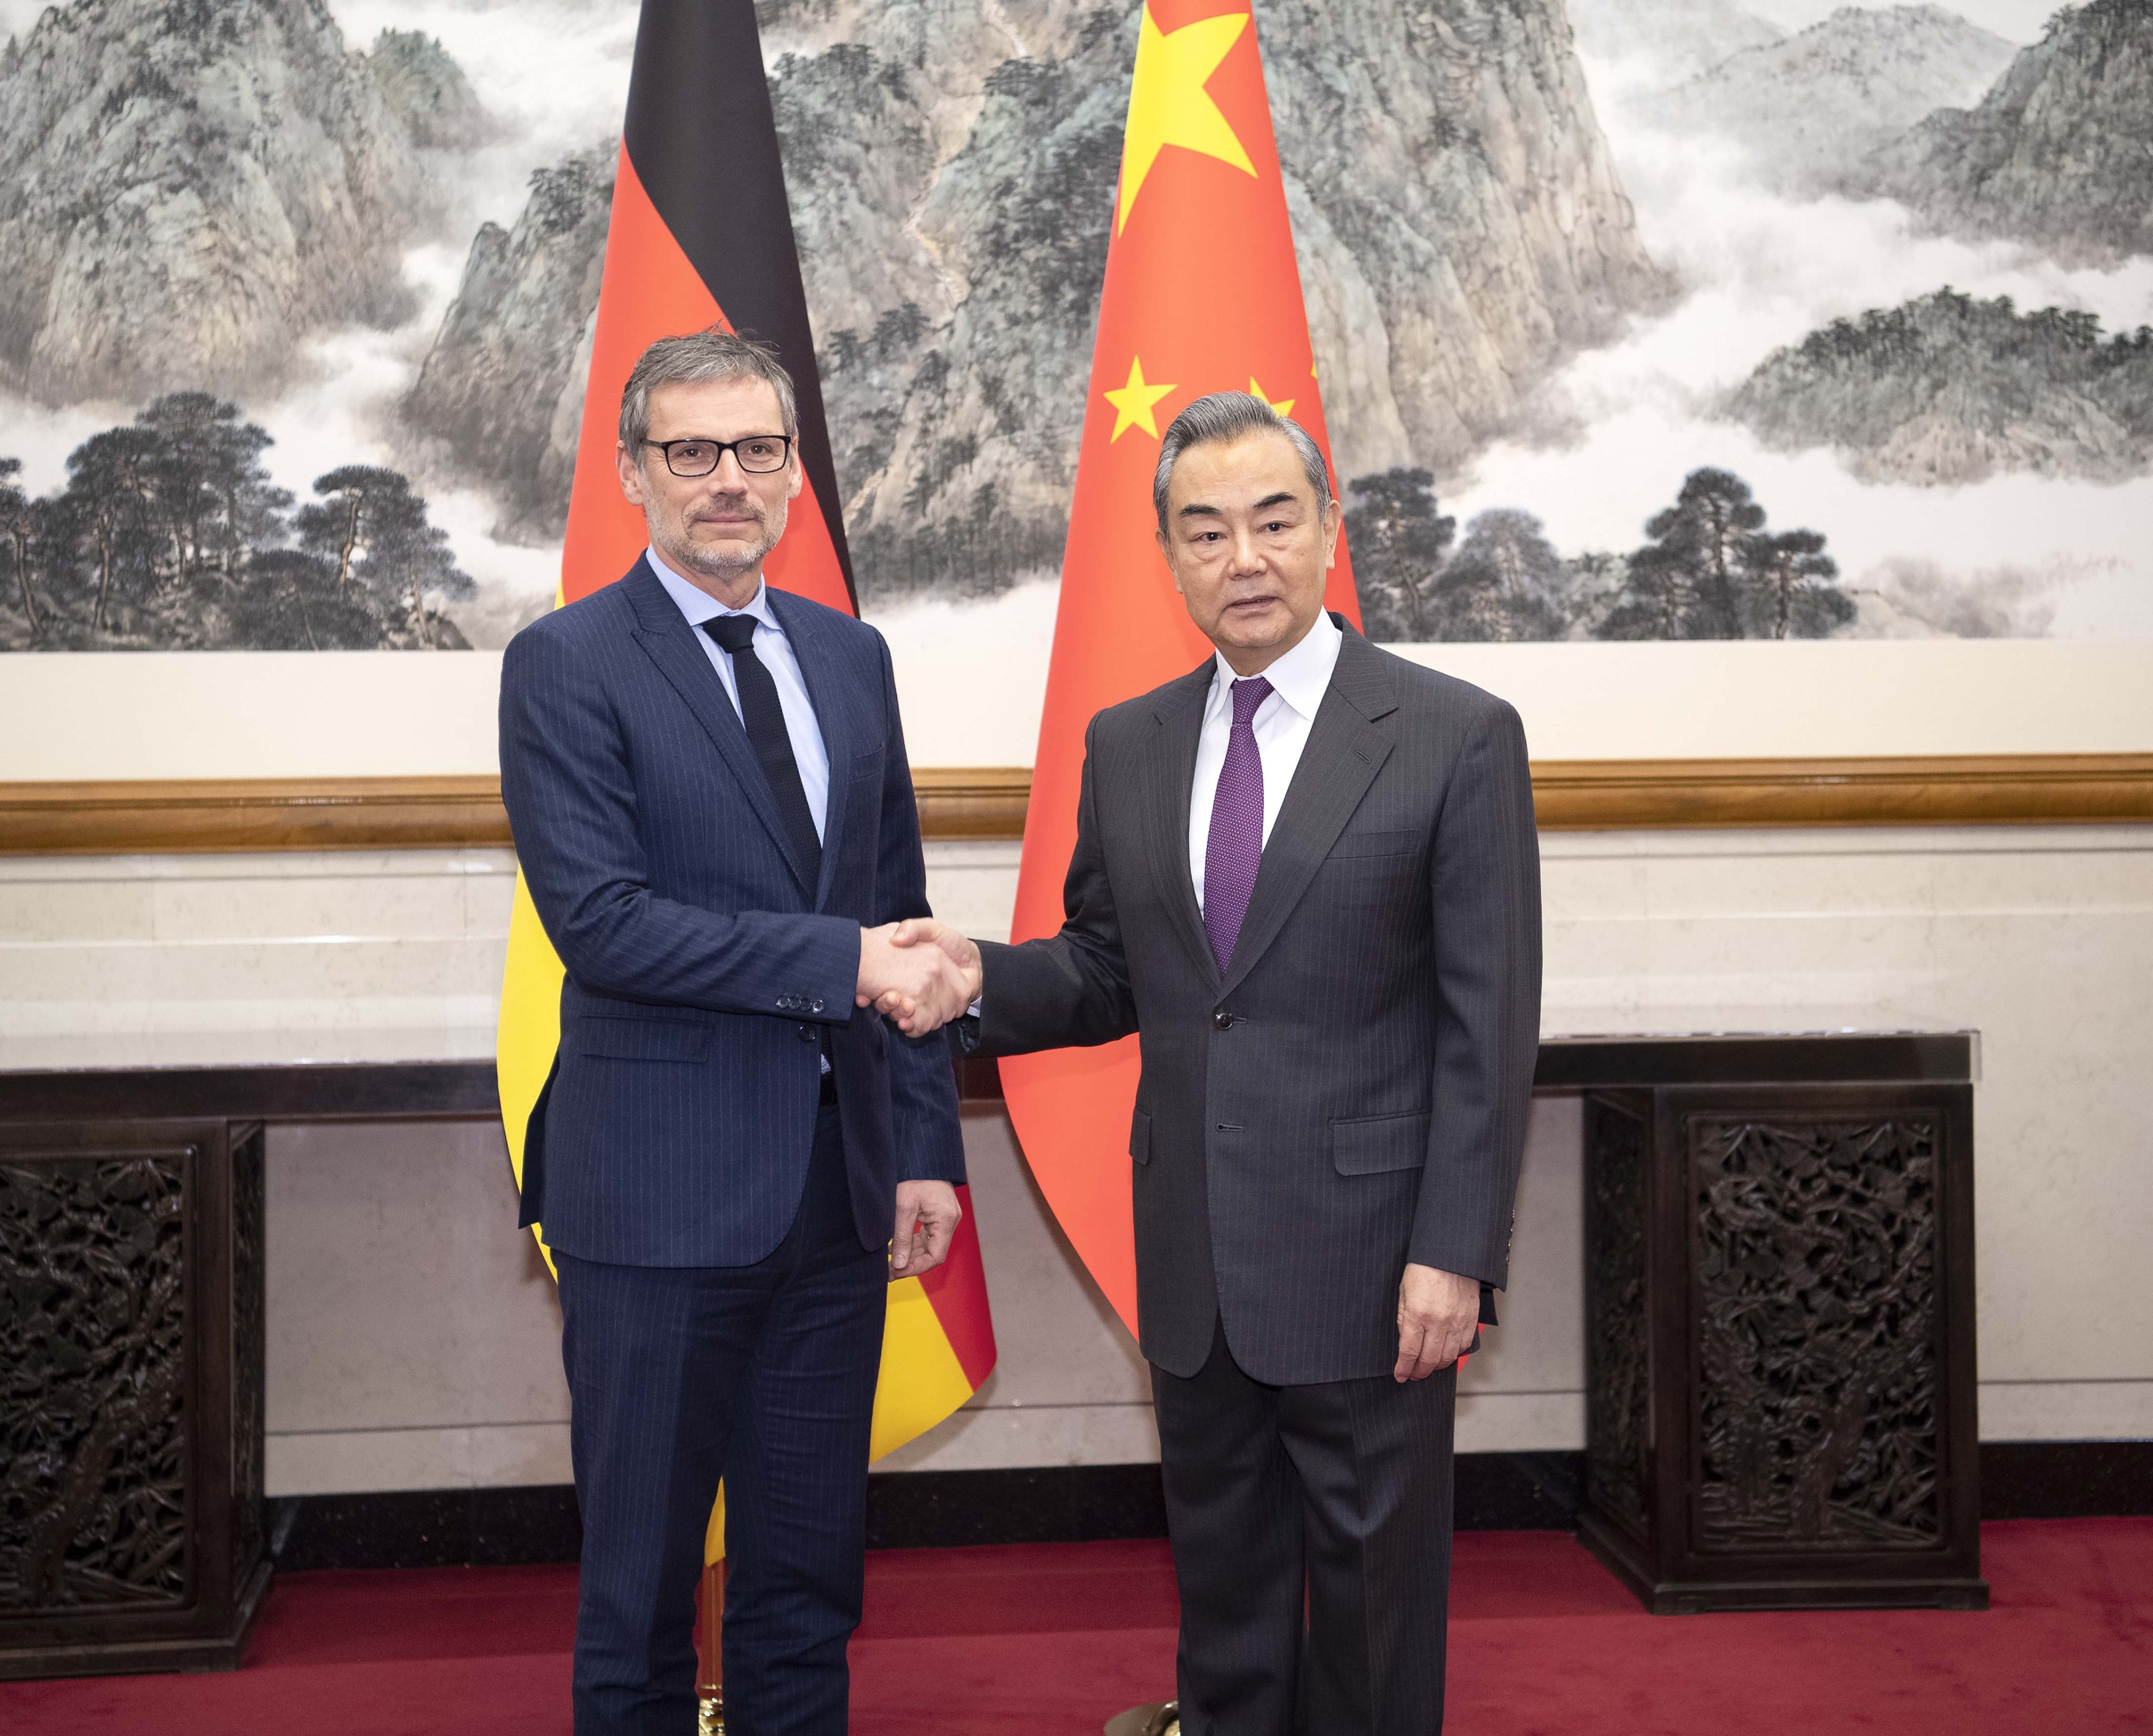 Chinese Foreign Minister Wang Yi (right) shakes hands with German foreign policy adviser Jens Plotner in Beijing on Friday. Photo: Xinhua